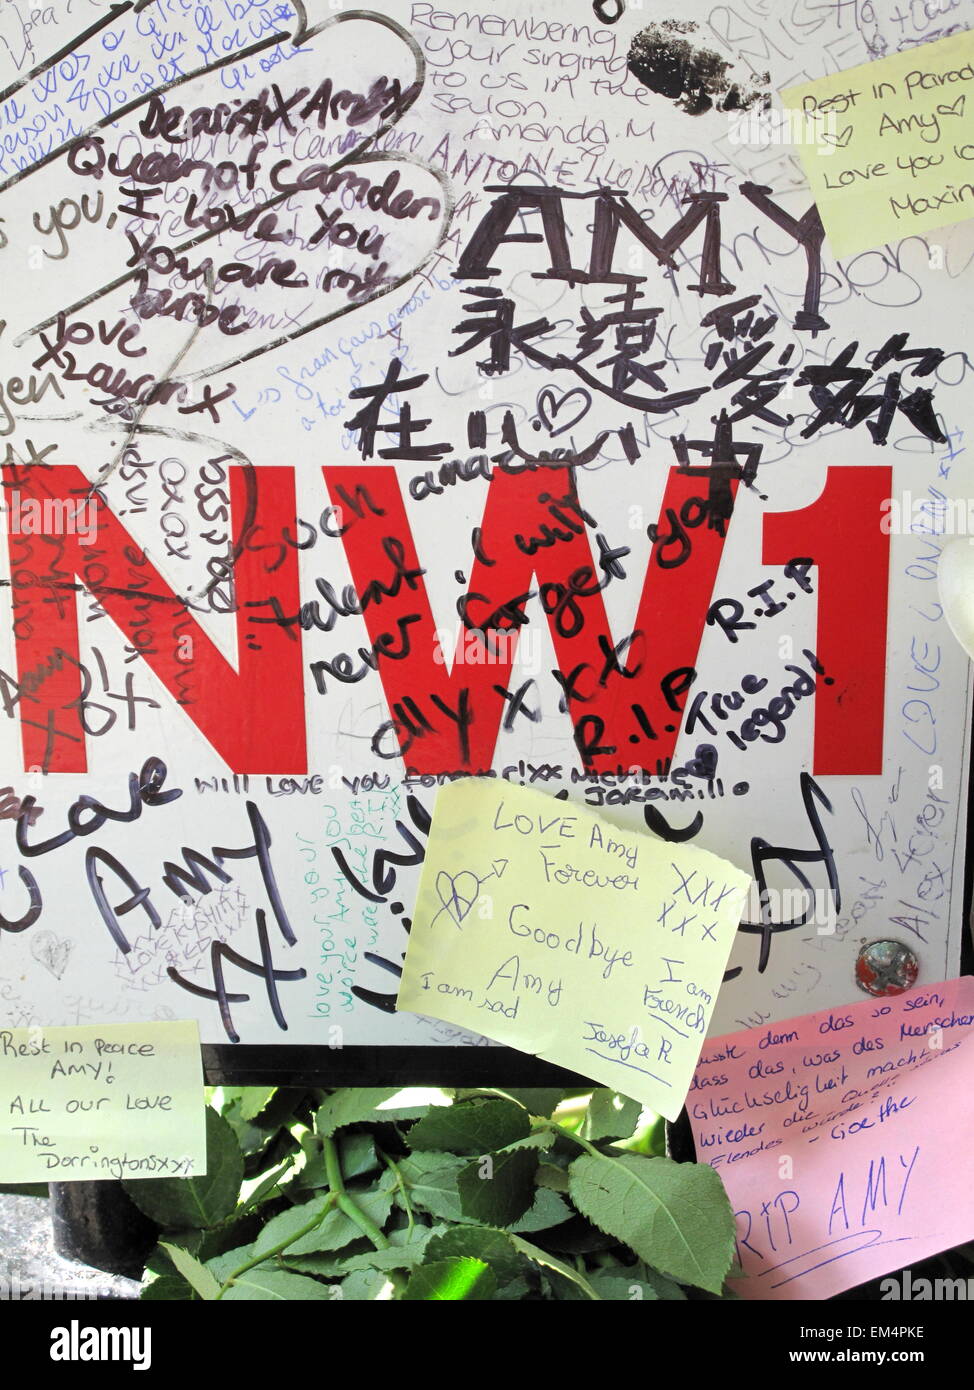 Tributes to Amy Winehouse after her death by her fans outside her home in Camden London in July 2011 Stock Photo